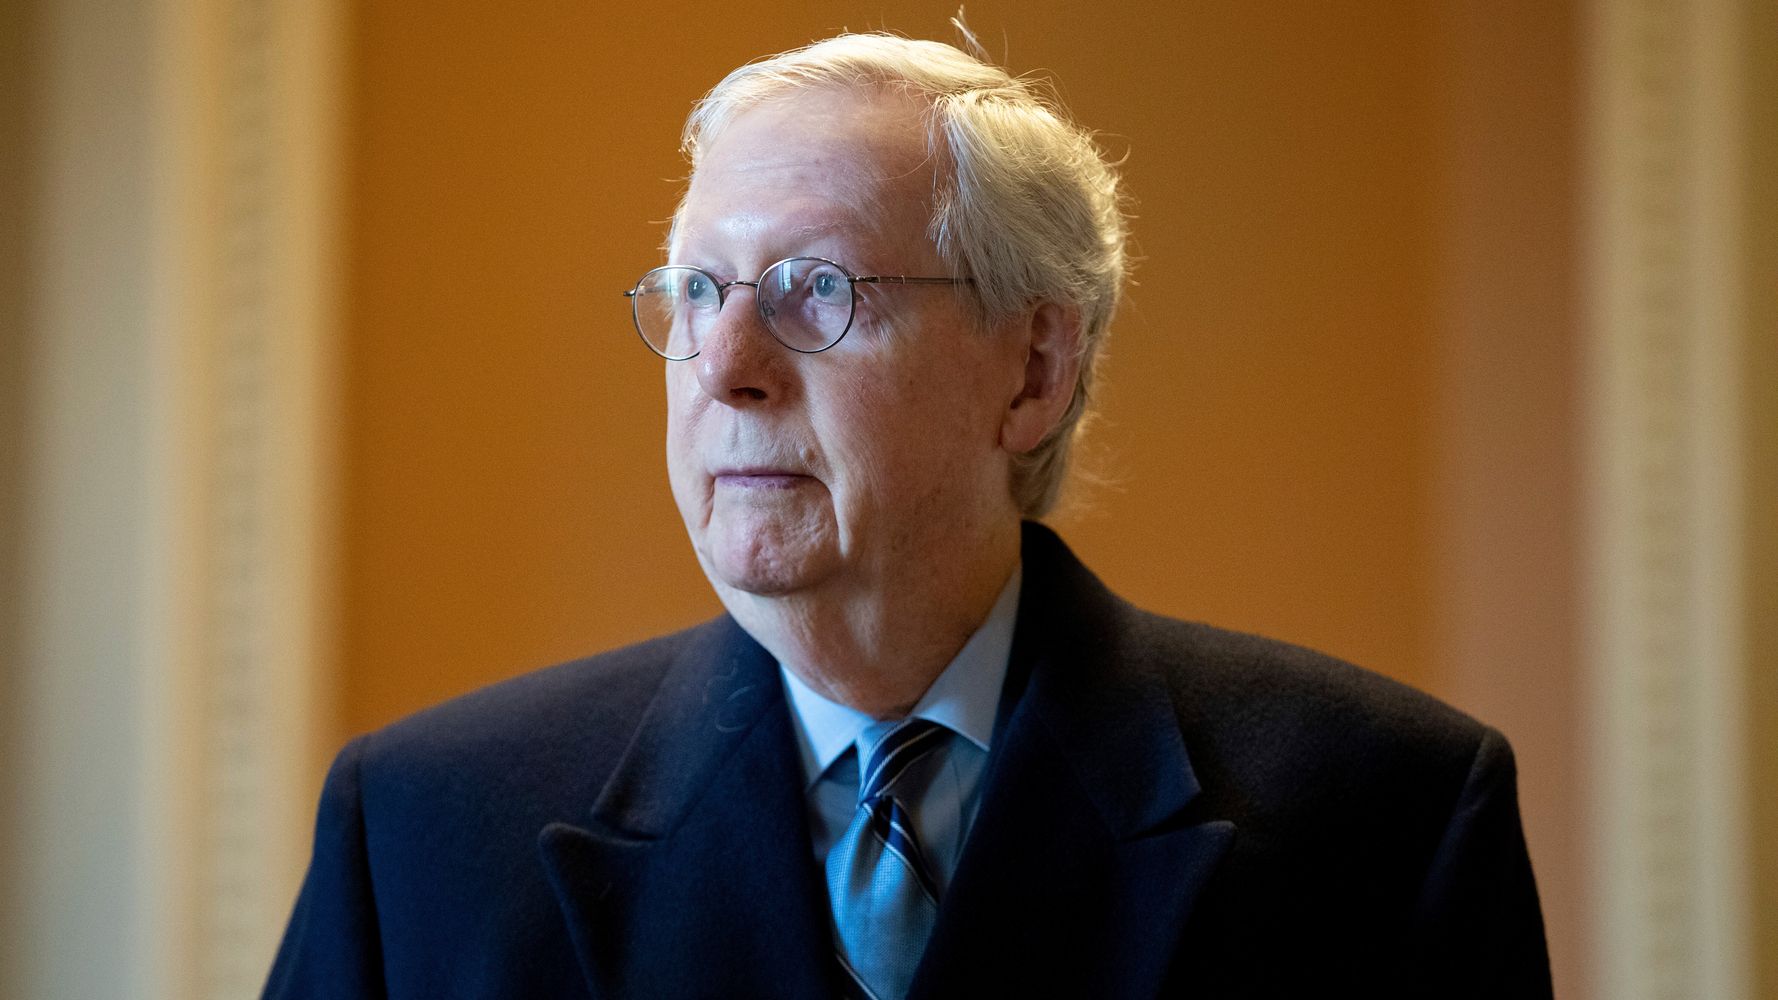 McConnell Responds Defensively To Criticism Of His 'African American' Comment